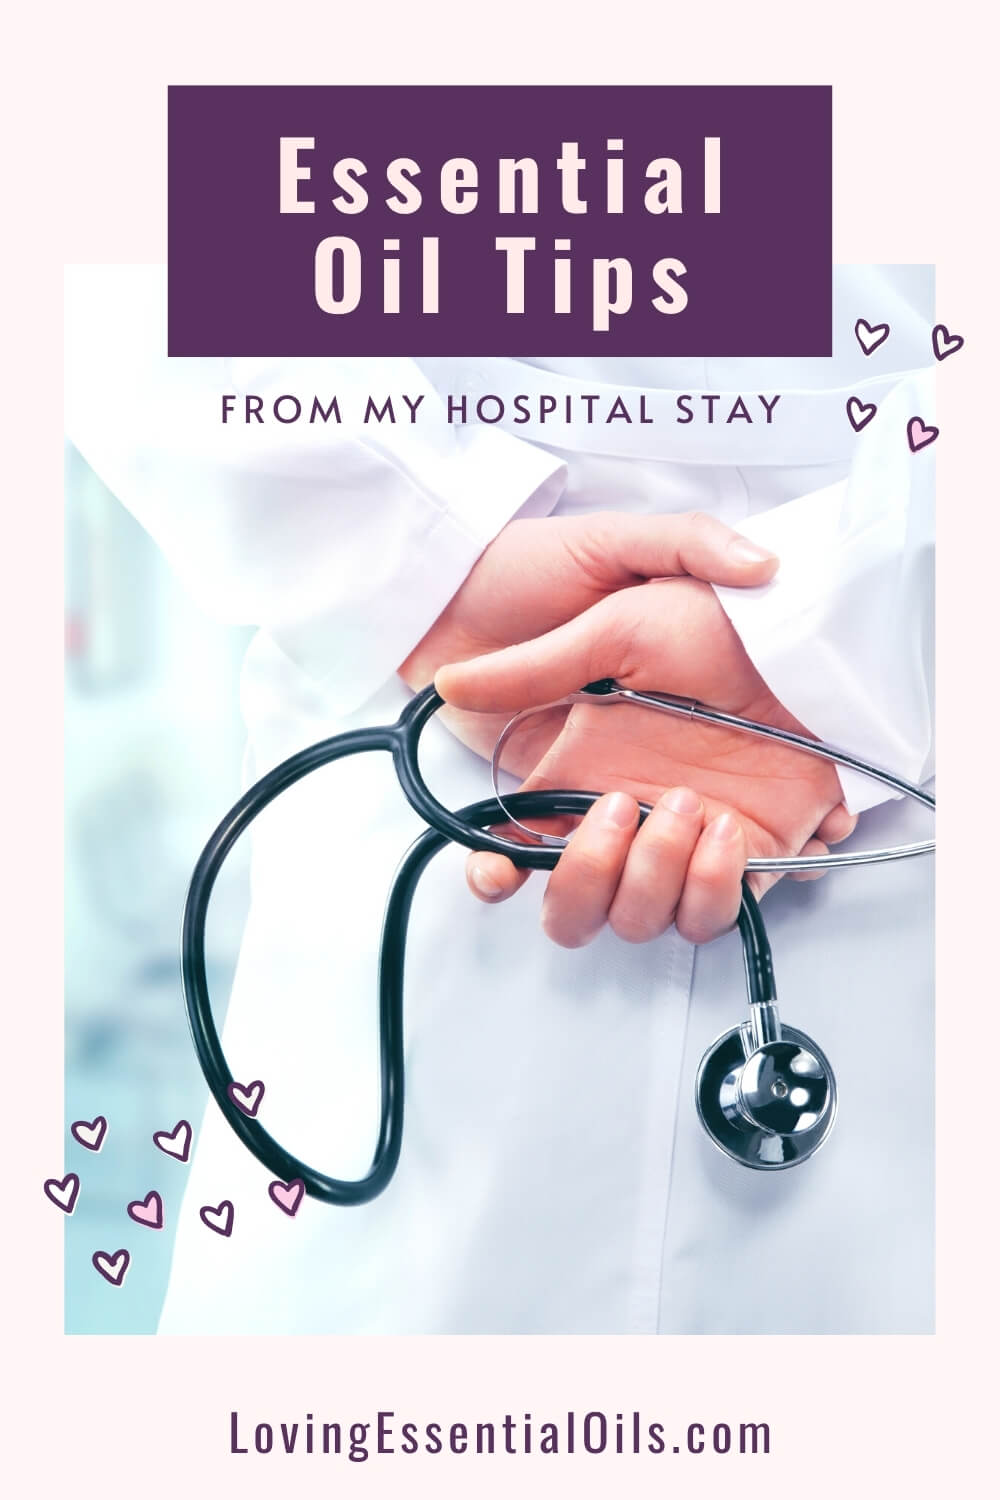 Essential Oils for Hospital and Surgery by Loving Essential Oils